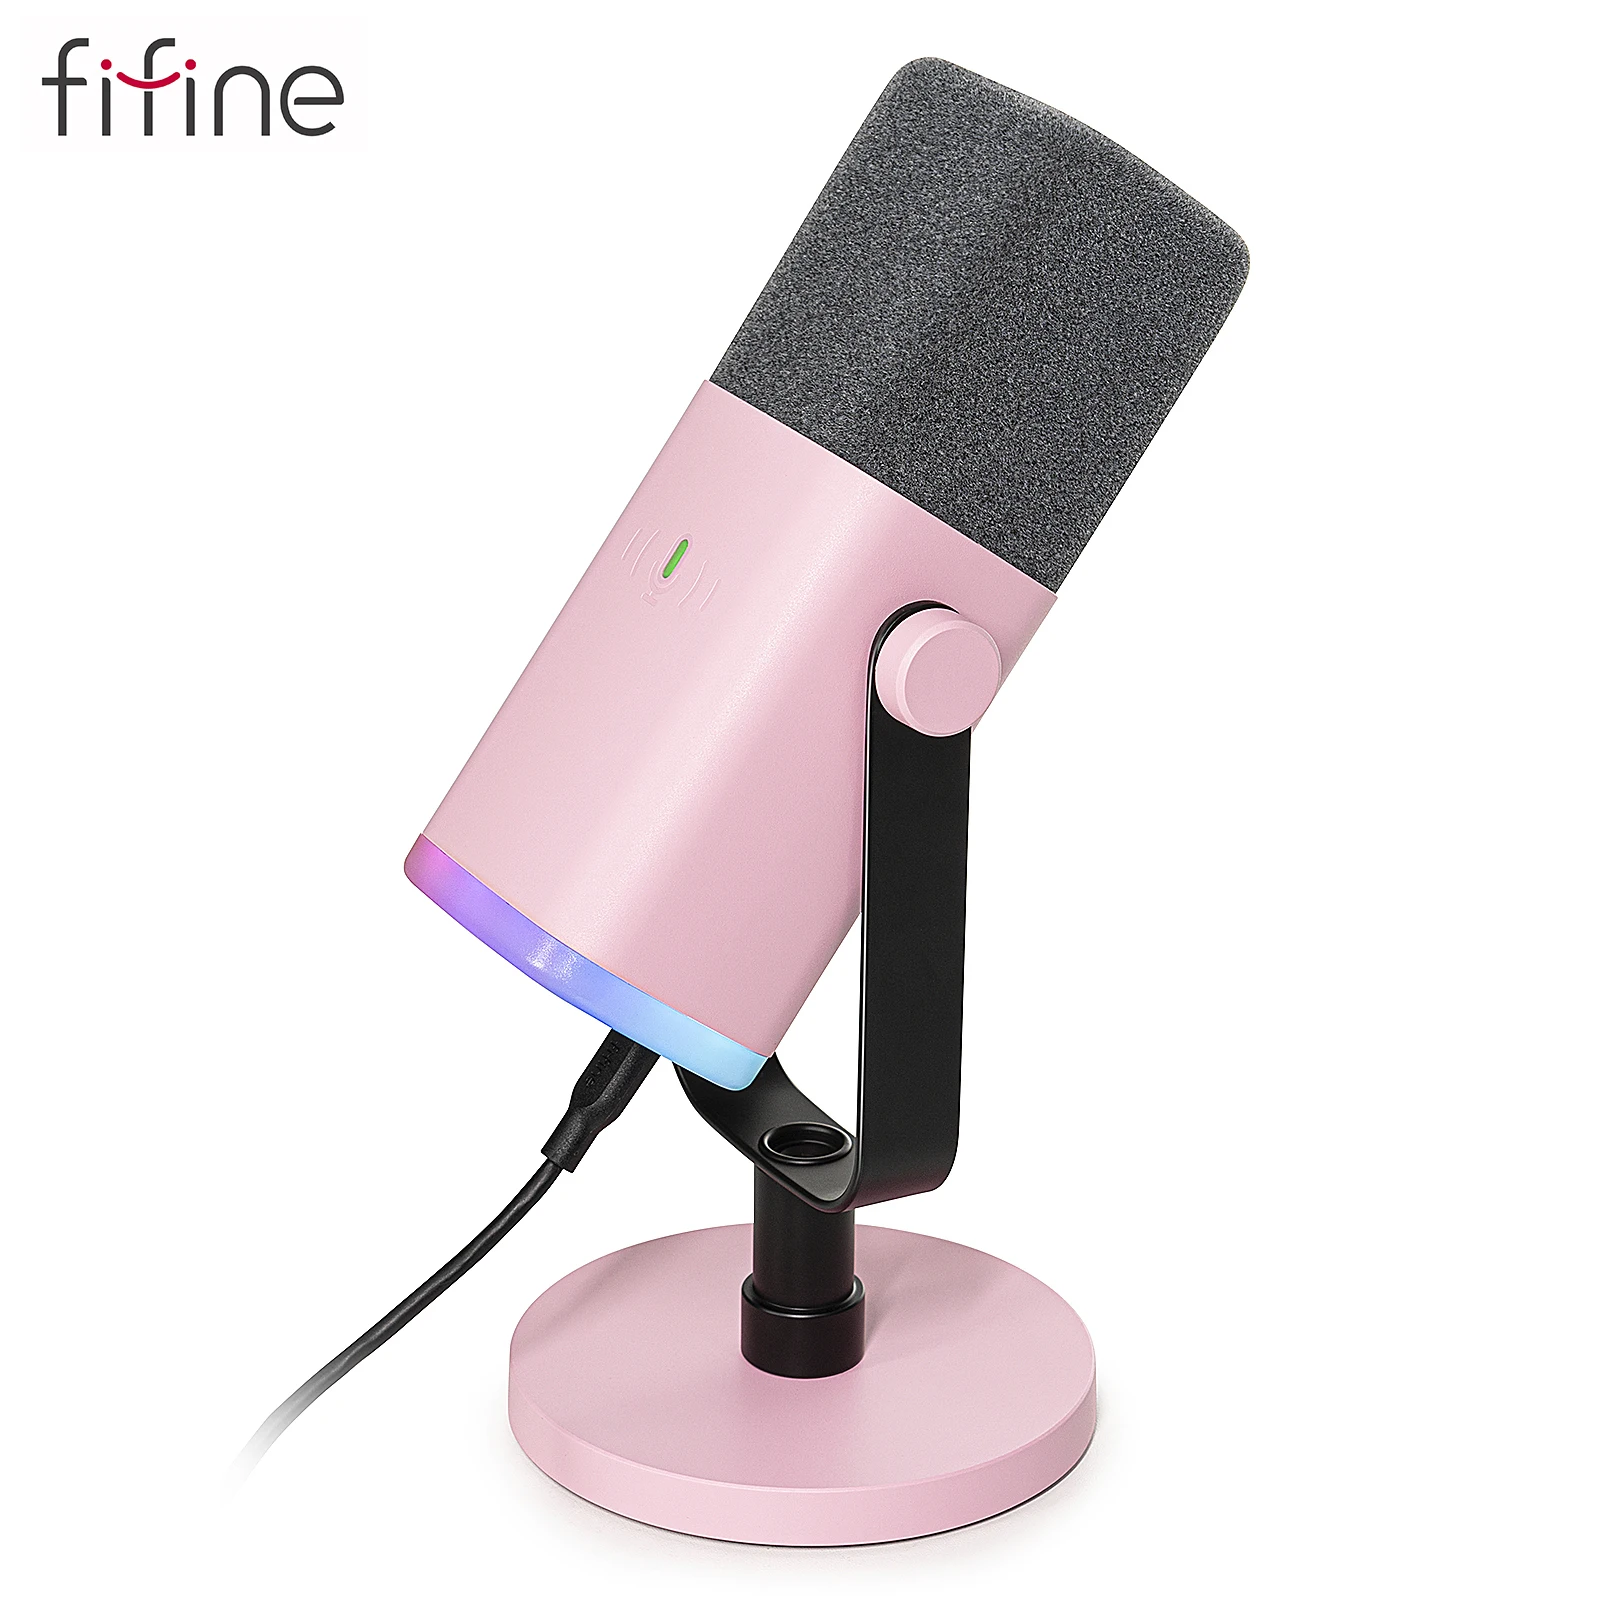 Fifine AM8 Microphone Review - My New Favorite Mic Under 60 Dollars! 